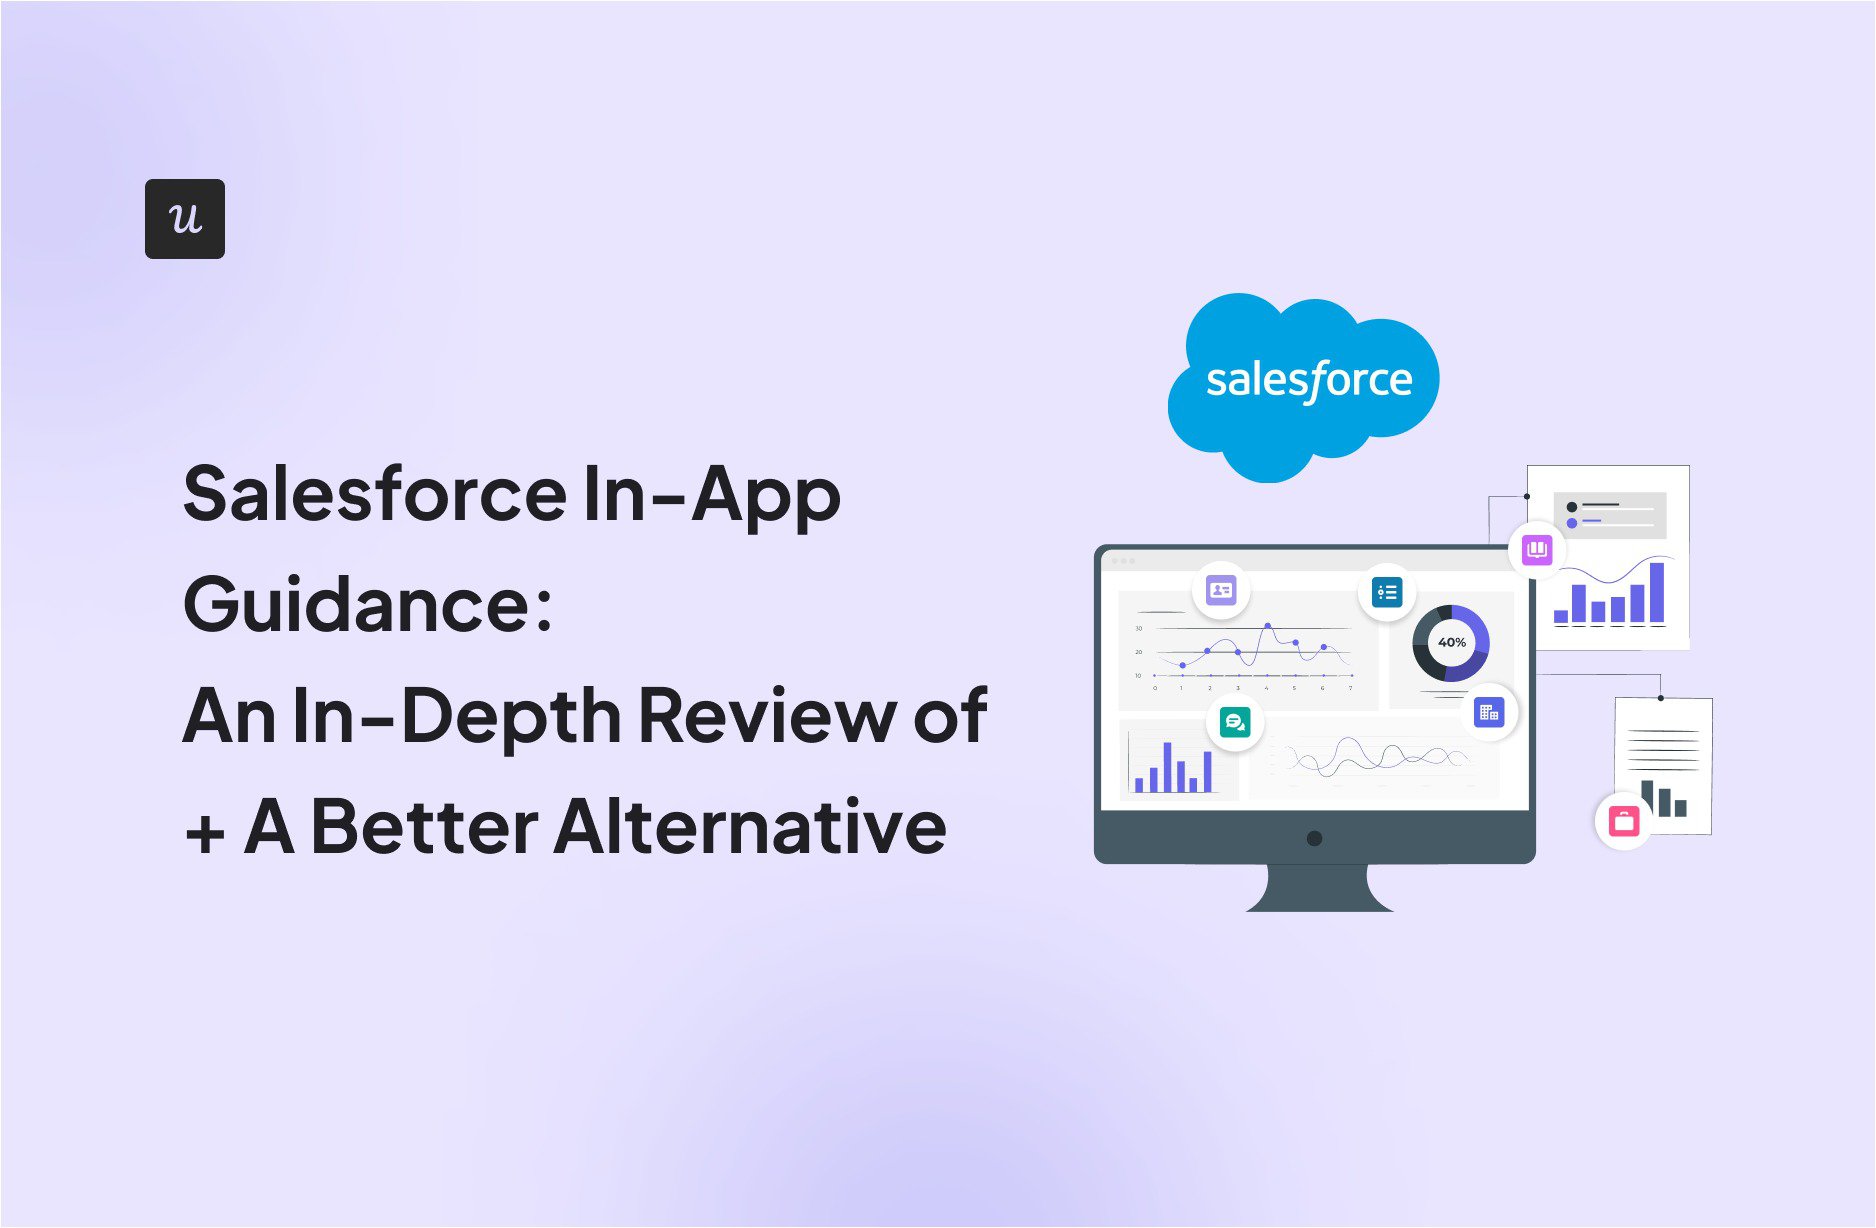 Salesforce In-App Guidance: An In-Depth Review of + A Better Alternative cover